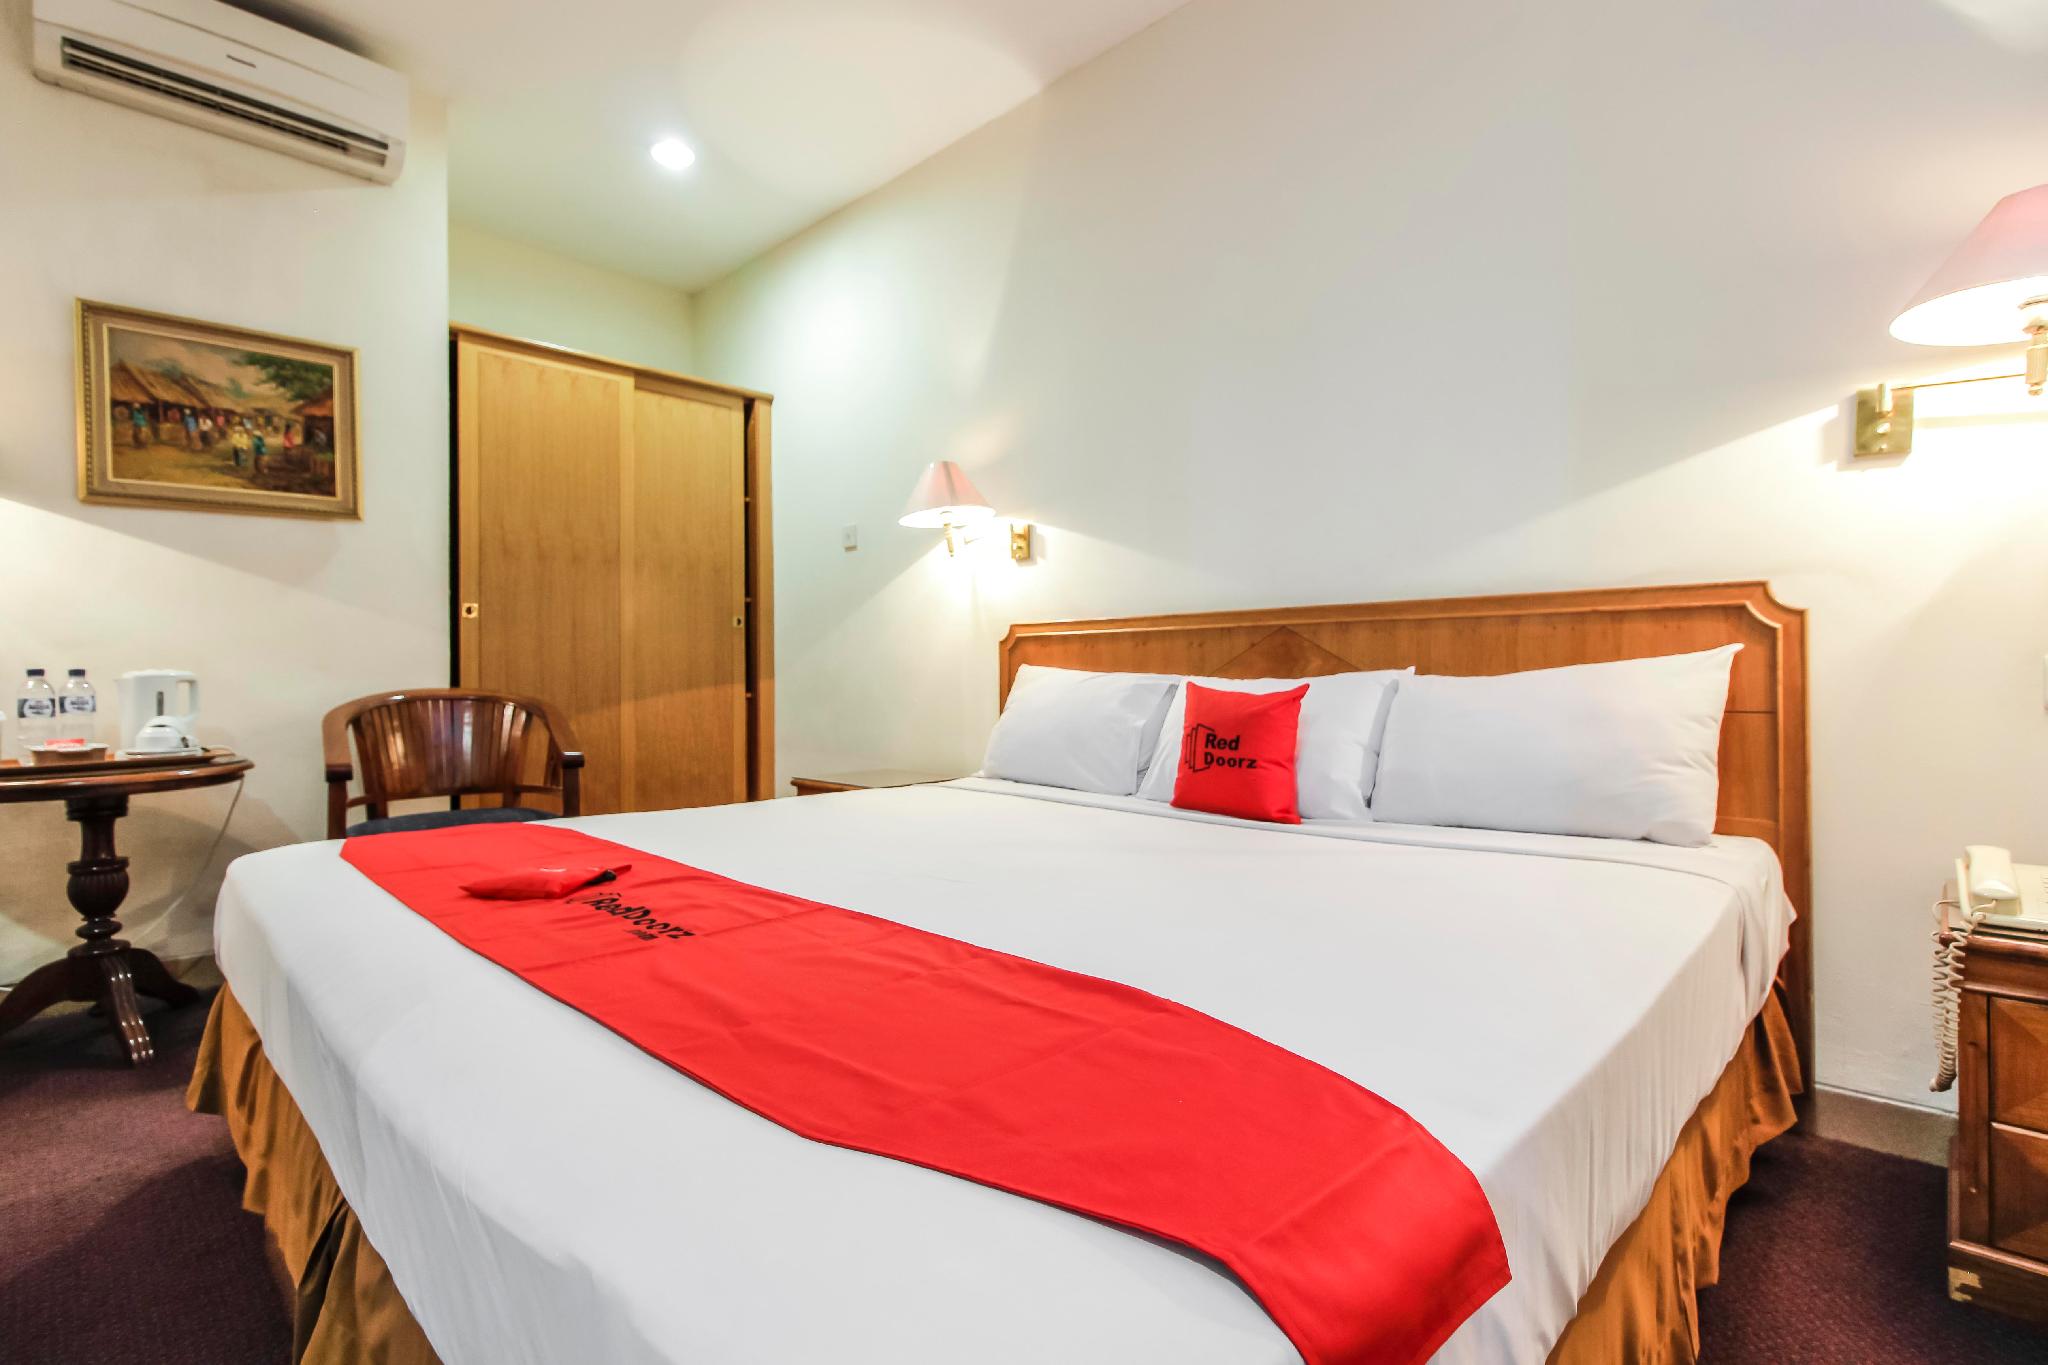 Iron recommend best of discounts Asian hotel